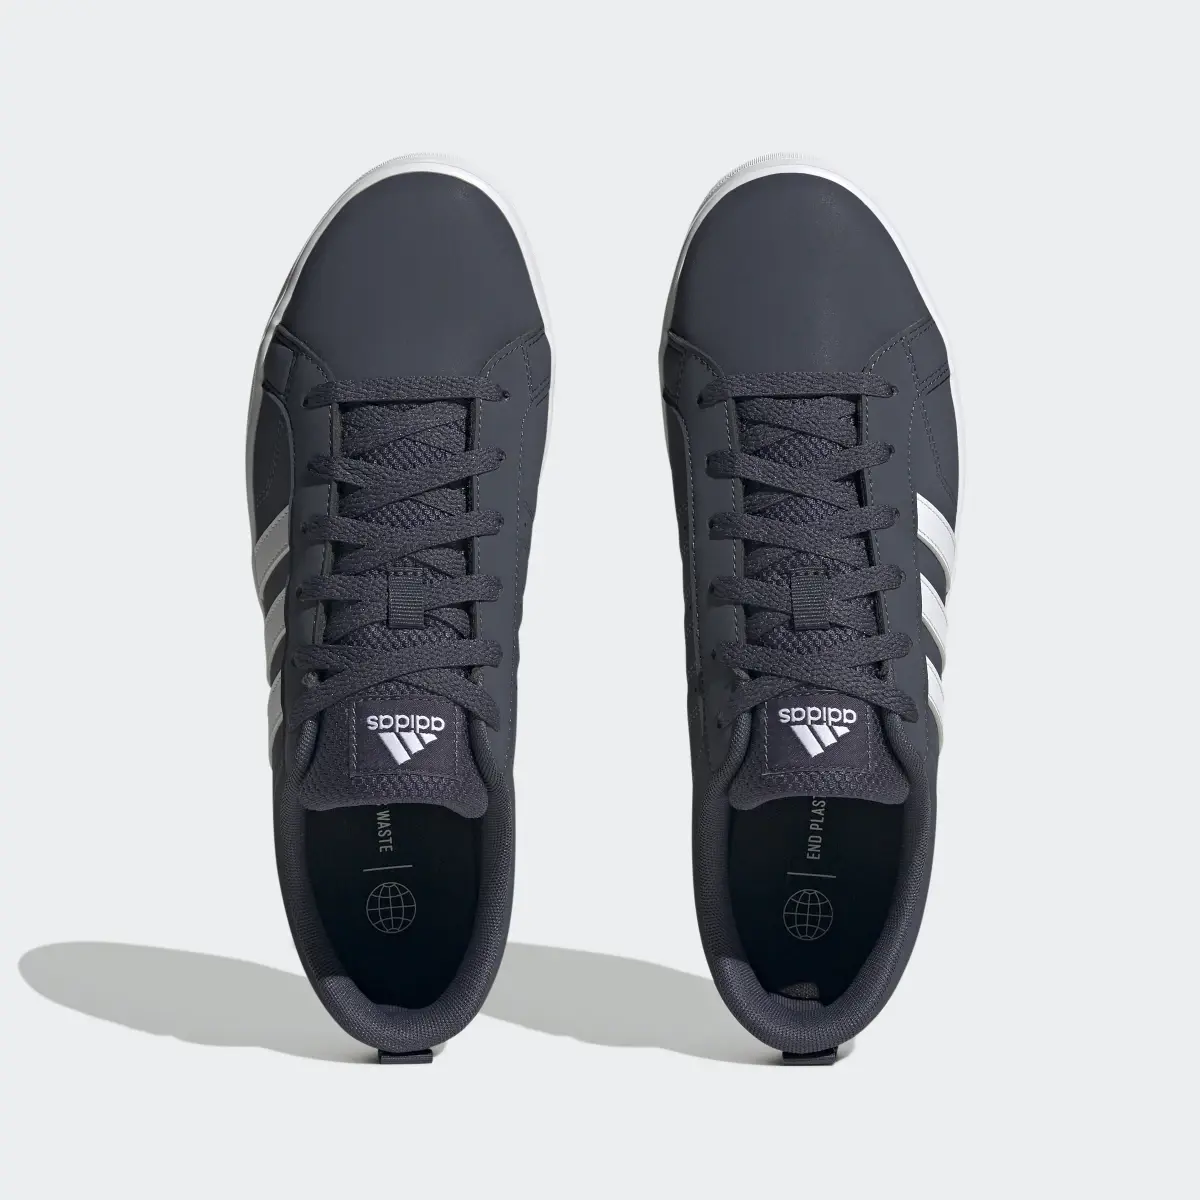 Adidas VS Pace 2.0 Lifestyle Skateboarding Shoes. 3